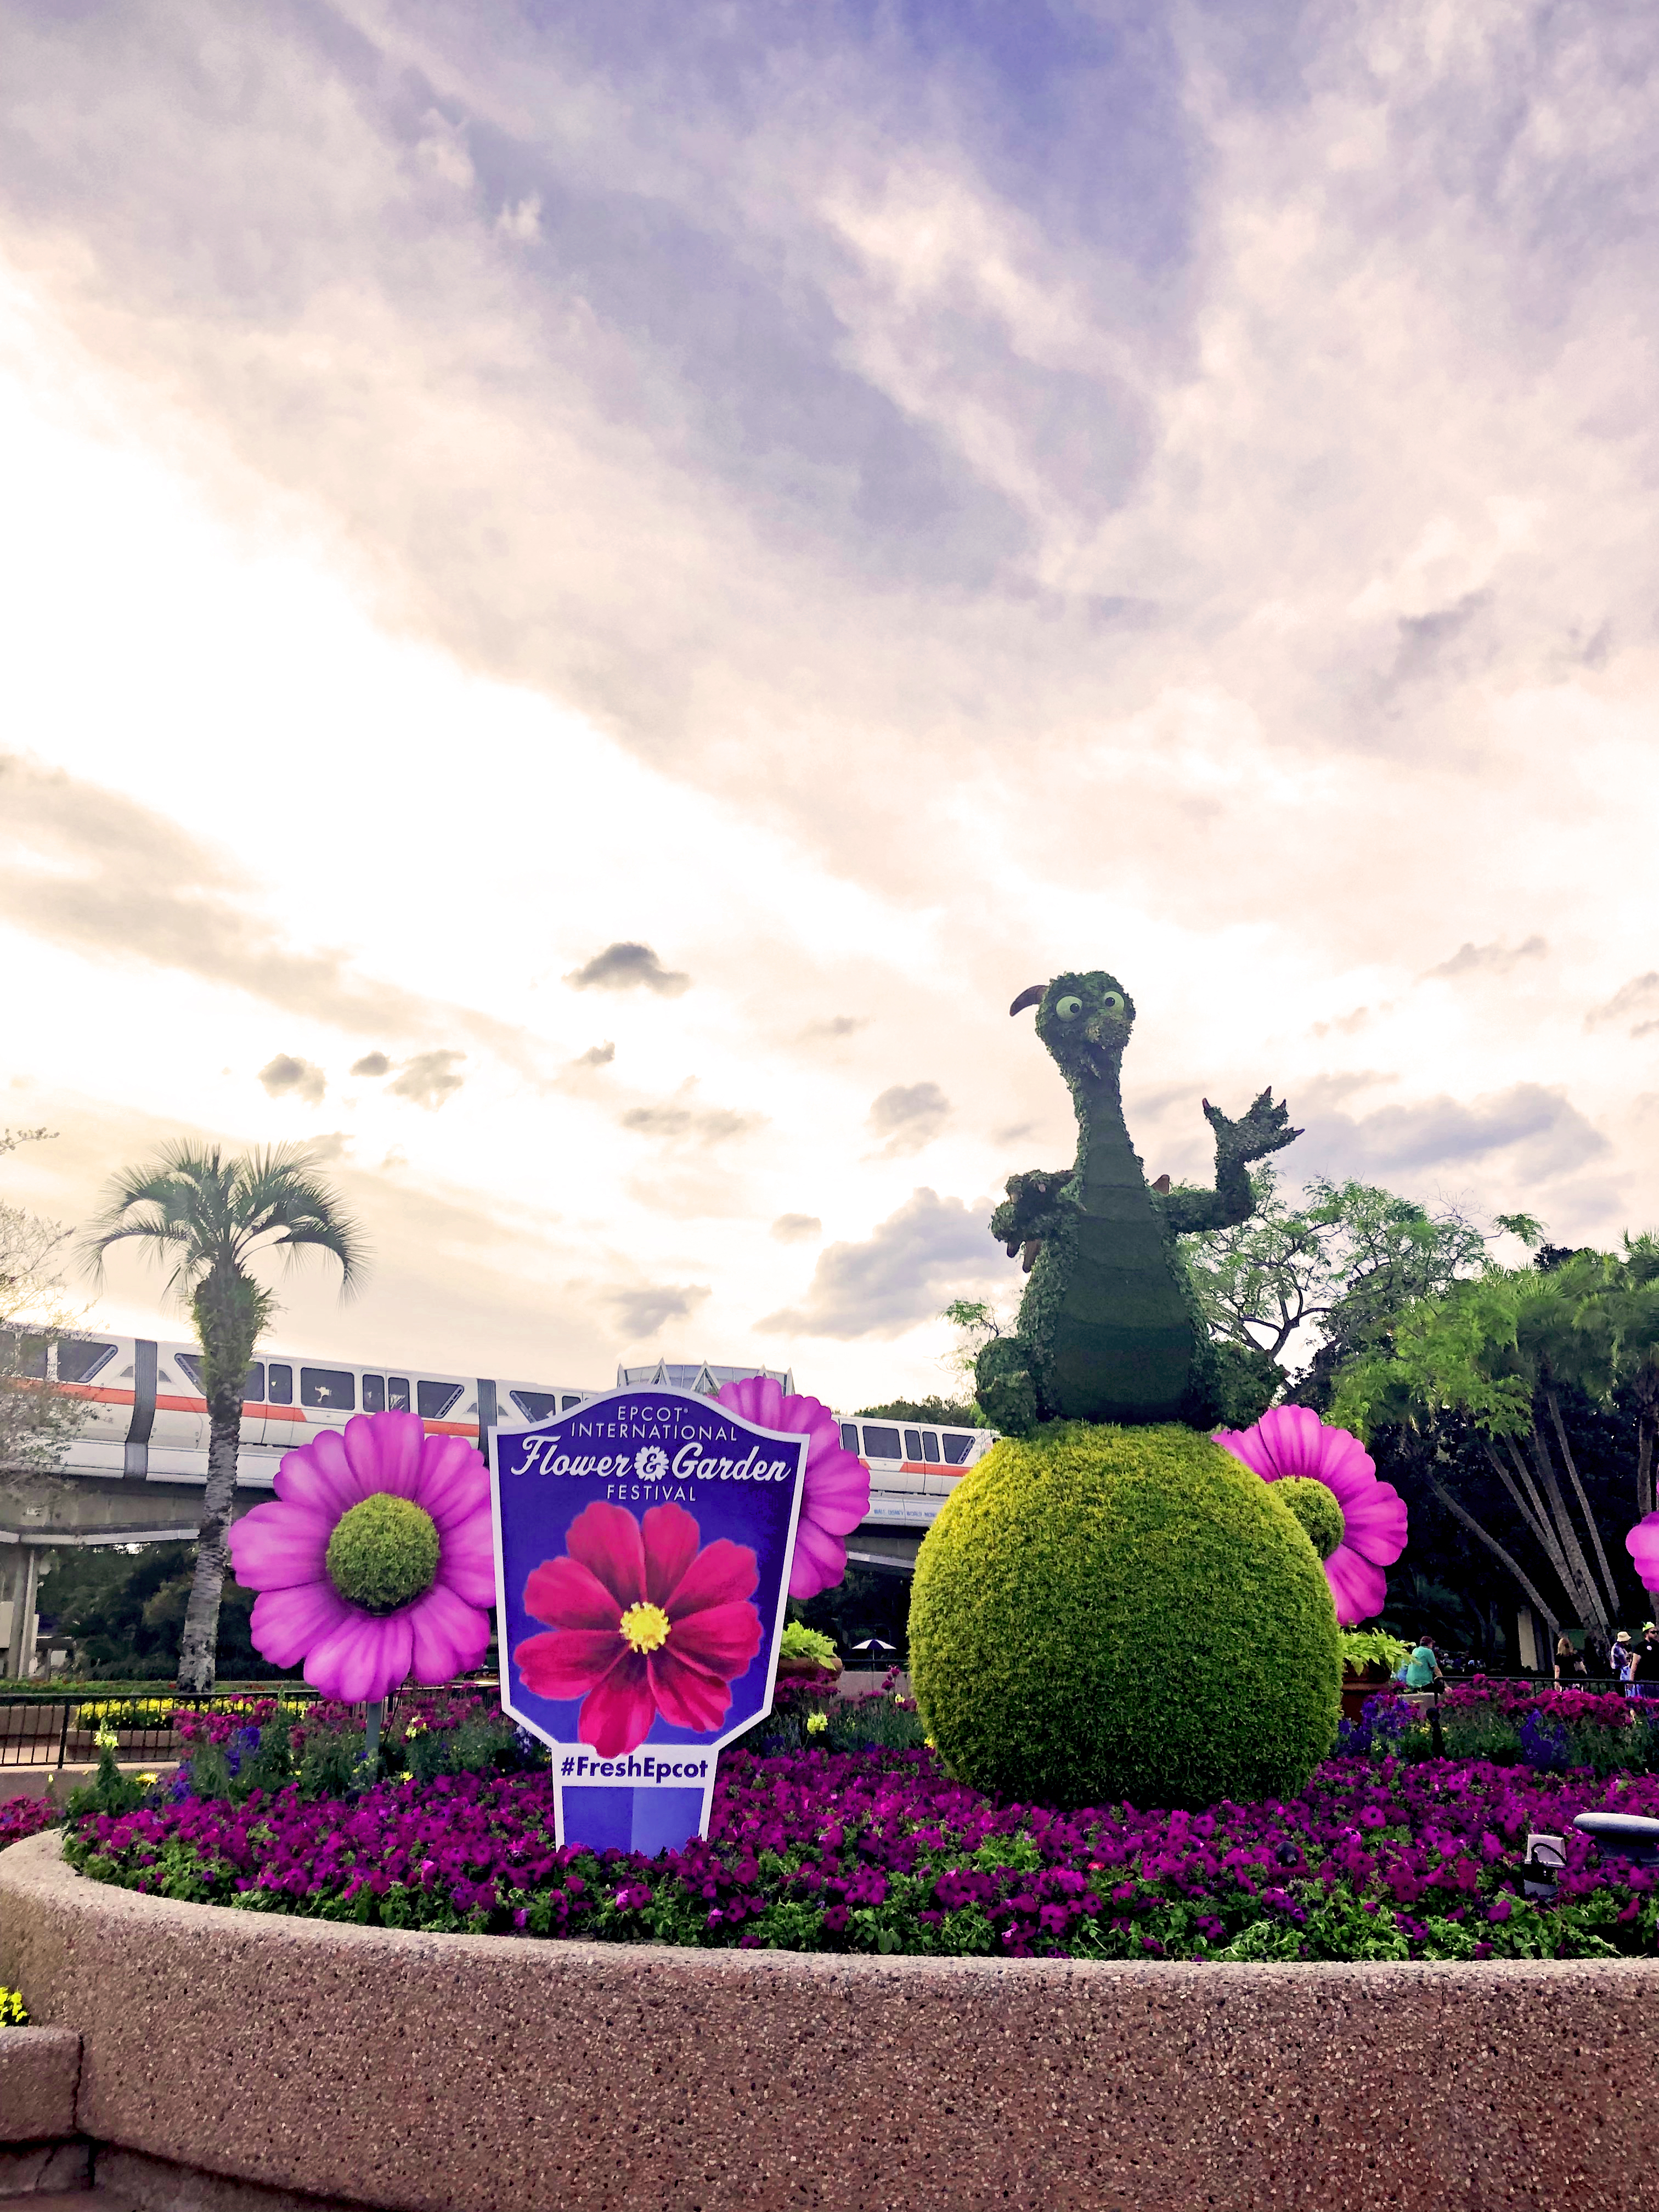 Daytime shot of Figment shrub sitting on top of rounded bush. Sign in front to the left of Figment that reads "Epcot International Flower & Garden Festival" colored in purple with a large pink flower on the sign and below that, labeled "#FreshEpcot". Everything is surrounded by massive purple flowers and small purple flowers with a orange-stripe monorail driving past in the background.